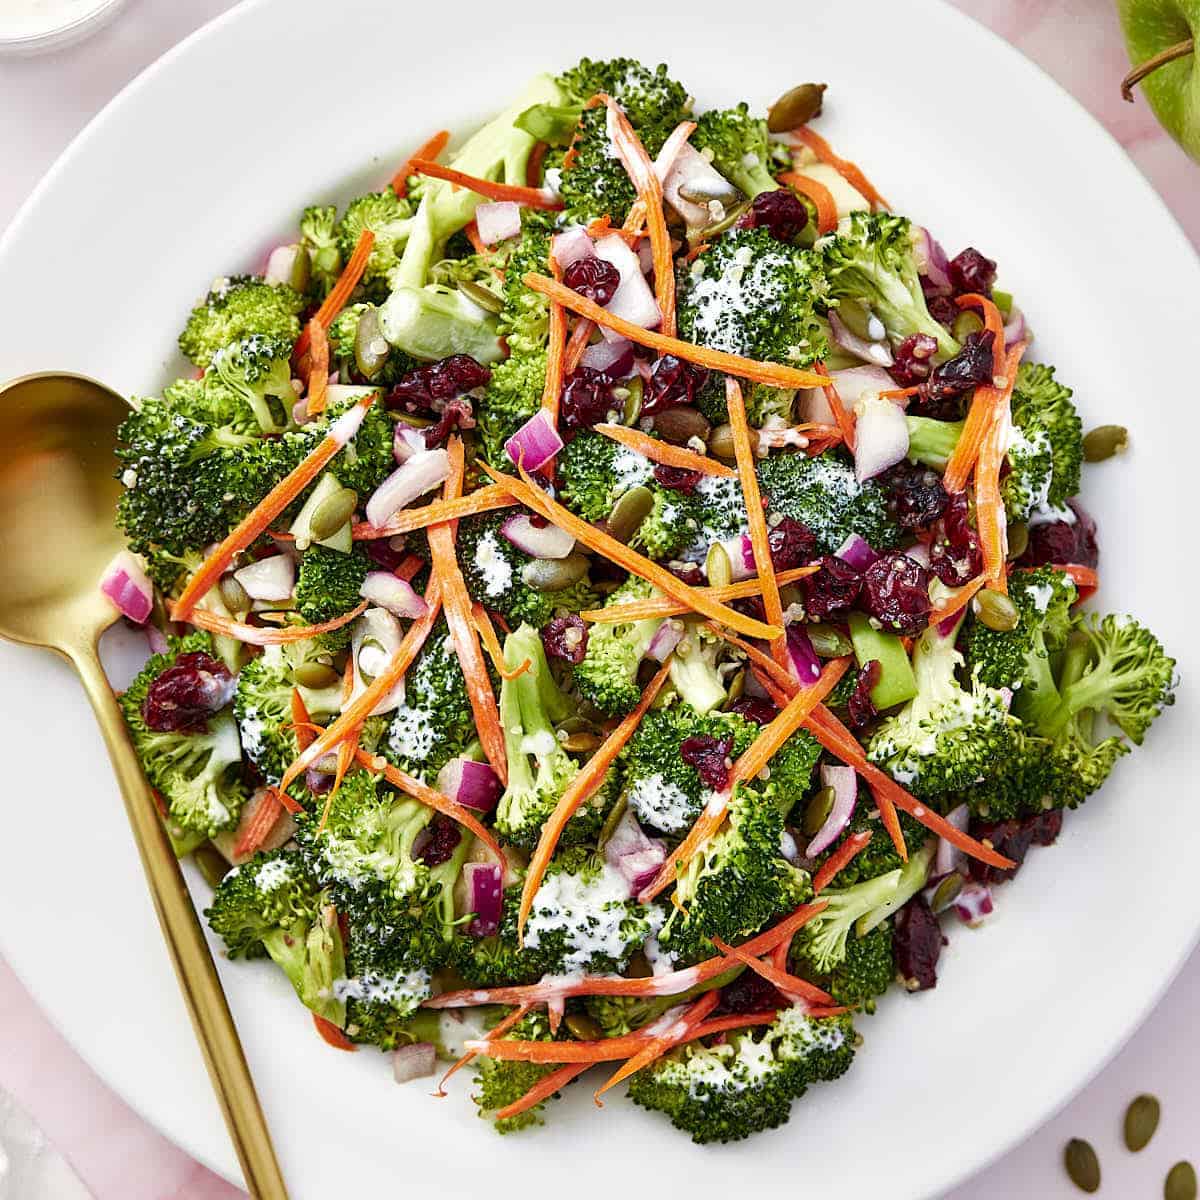 Overhead view of vegetarian raw broccoli salad with greek yogurt placed on a white platter.